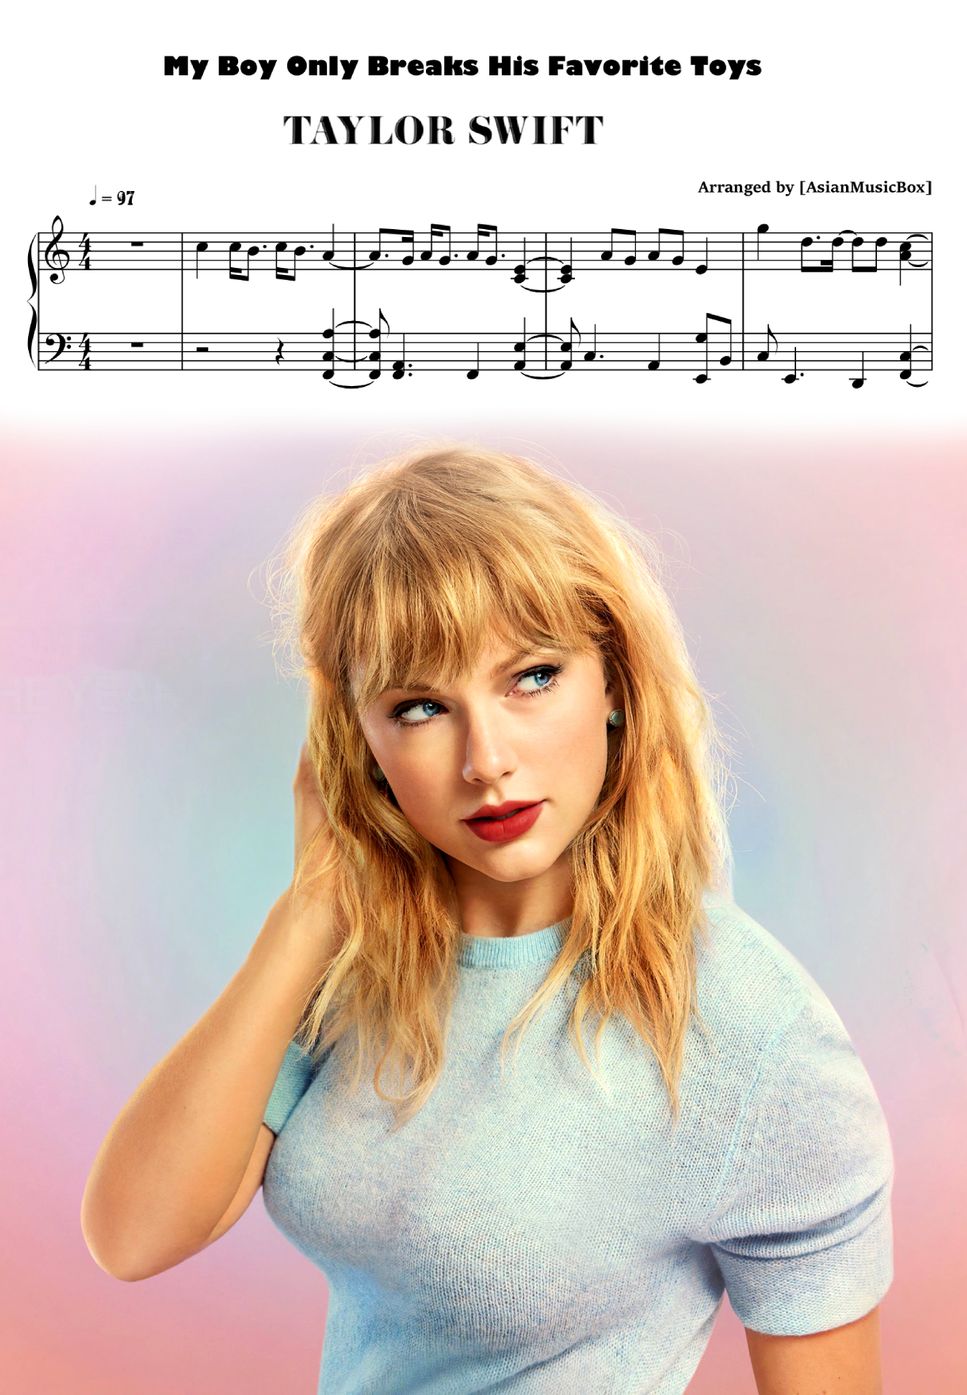 Taylor Swift - My Boy Only Breaks His Favorite Toys (Sheet, MIDI, MultiTracks & WAV) by AsianMusicBox